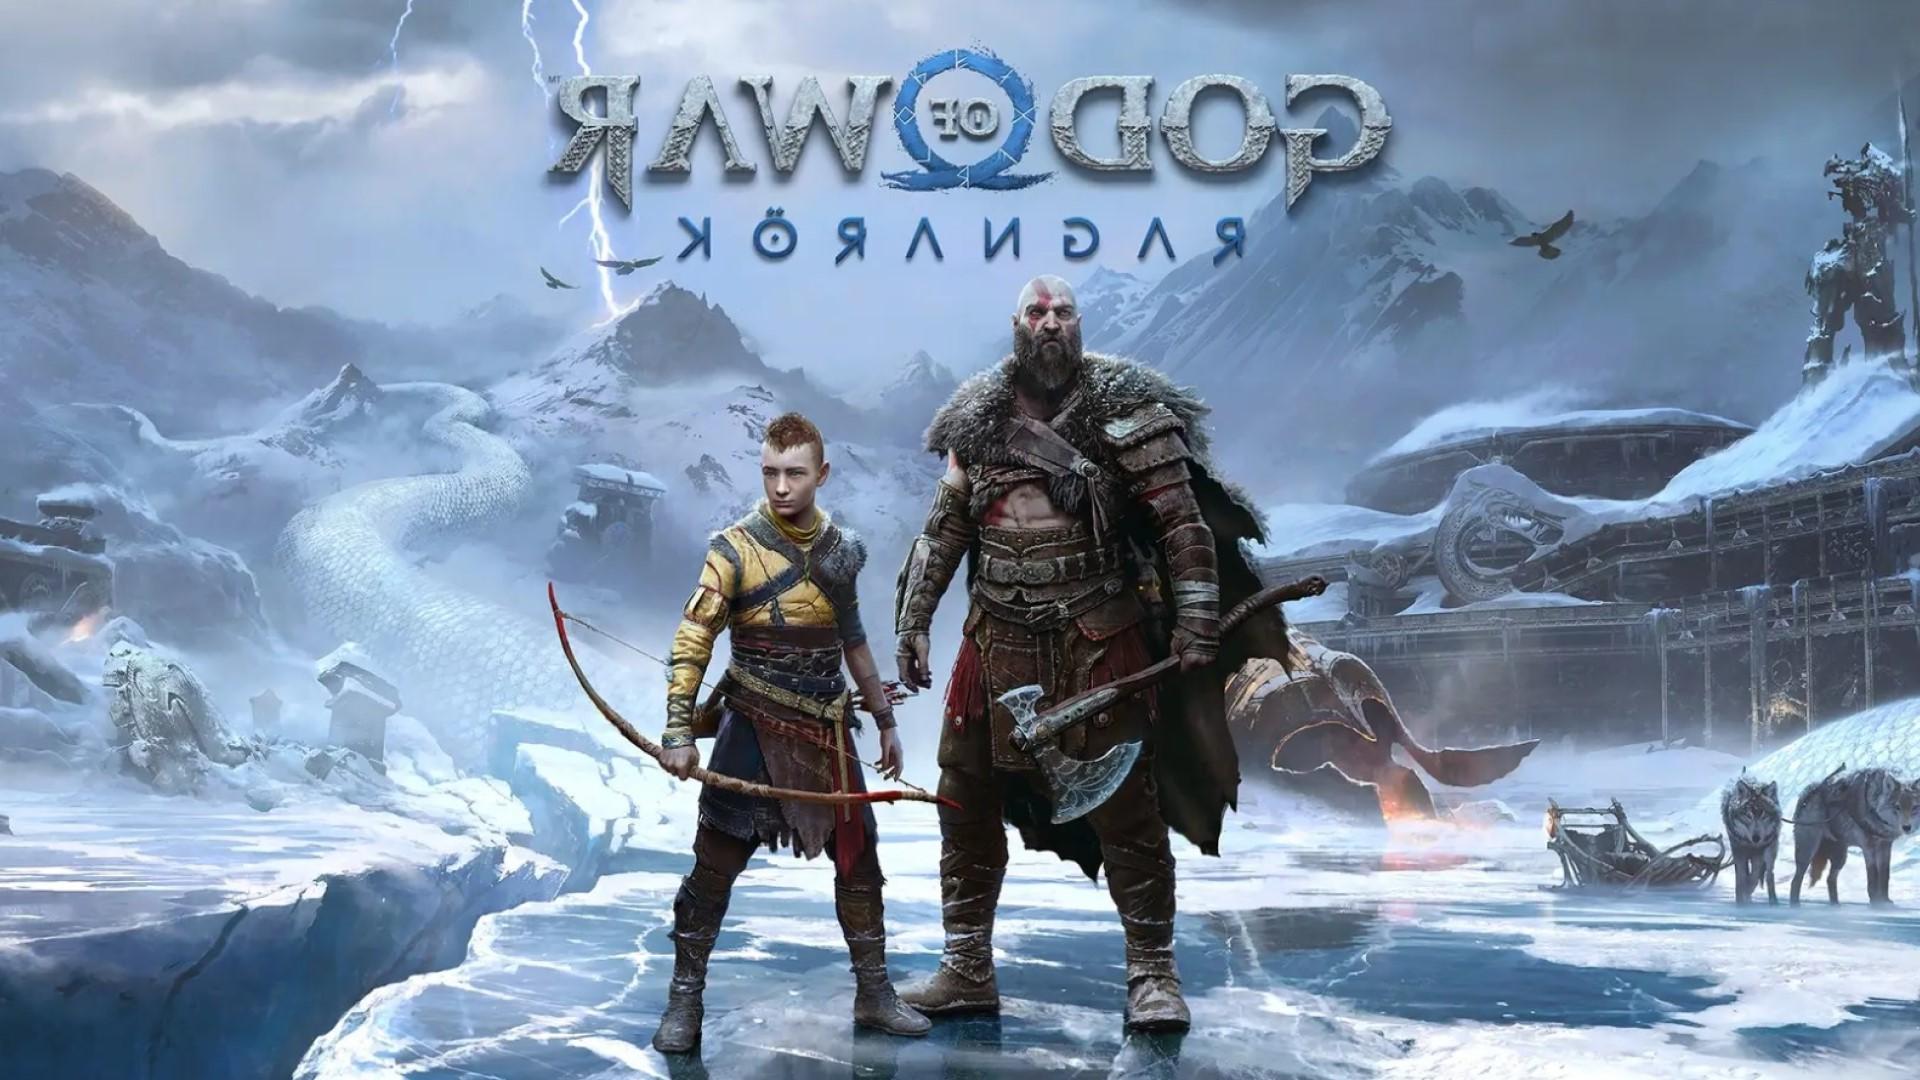 God of War Ragnarok arrived in 2022 Despite a delay in the speculation about the demise of the report News 24